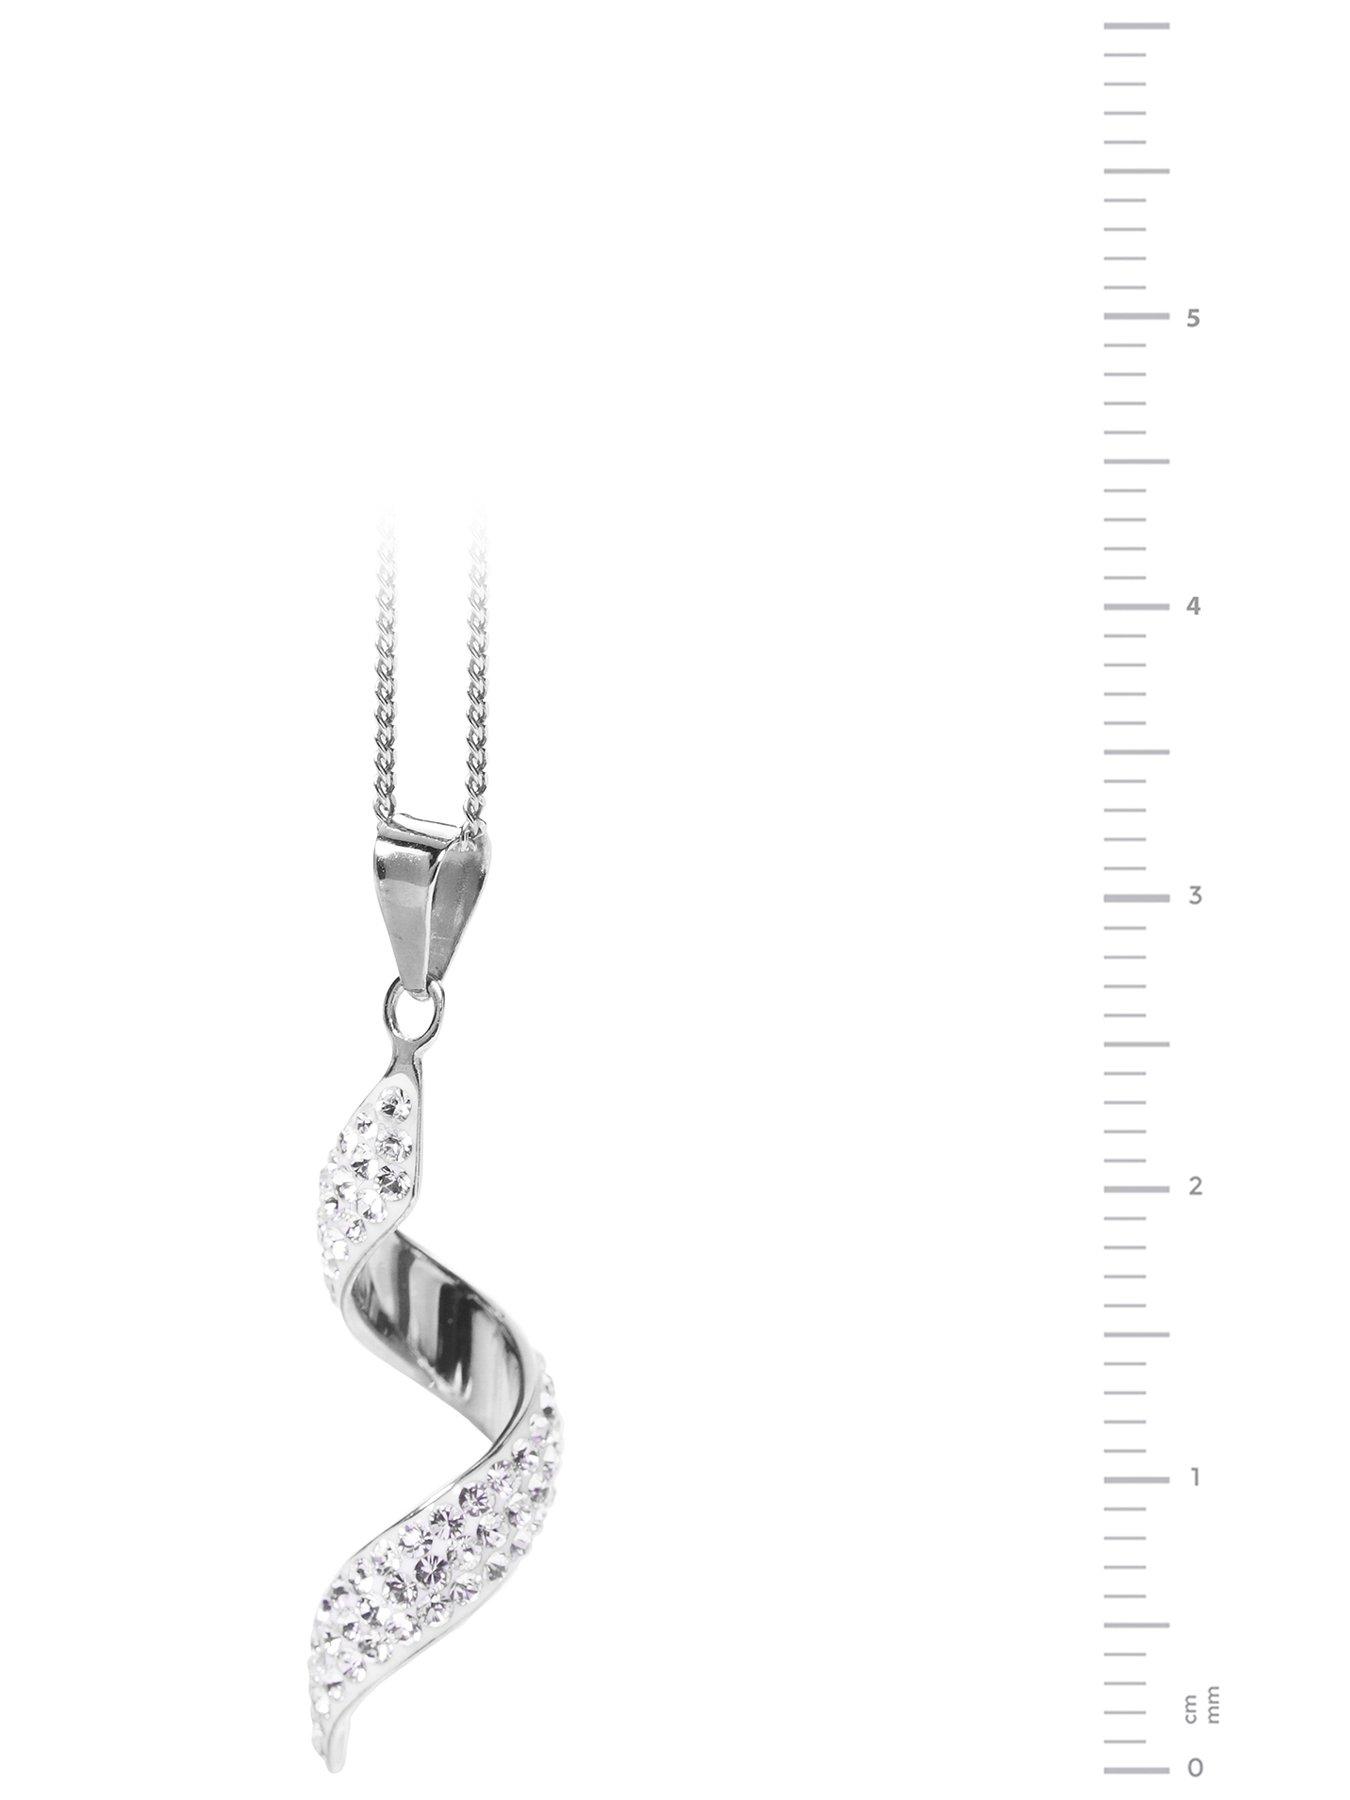 Jewellery & watches Sterling Silver Crystal Pendant and Hook Earrings Set with 18 Inch Curb Chain